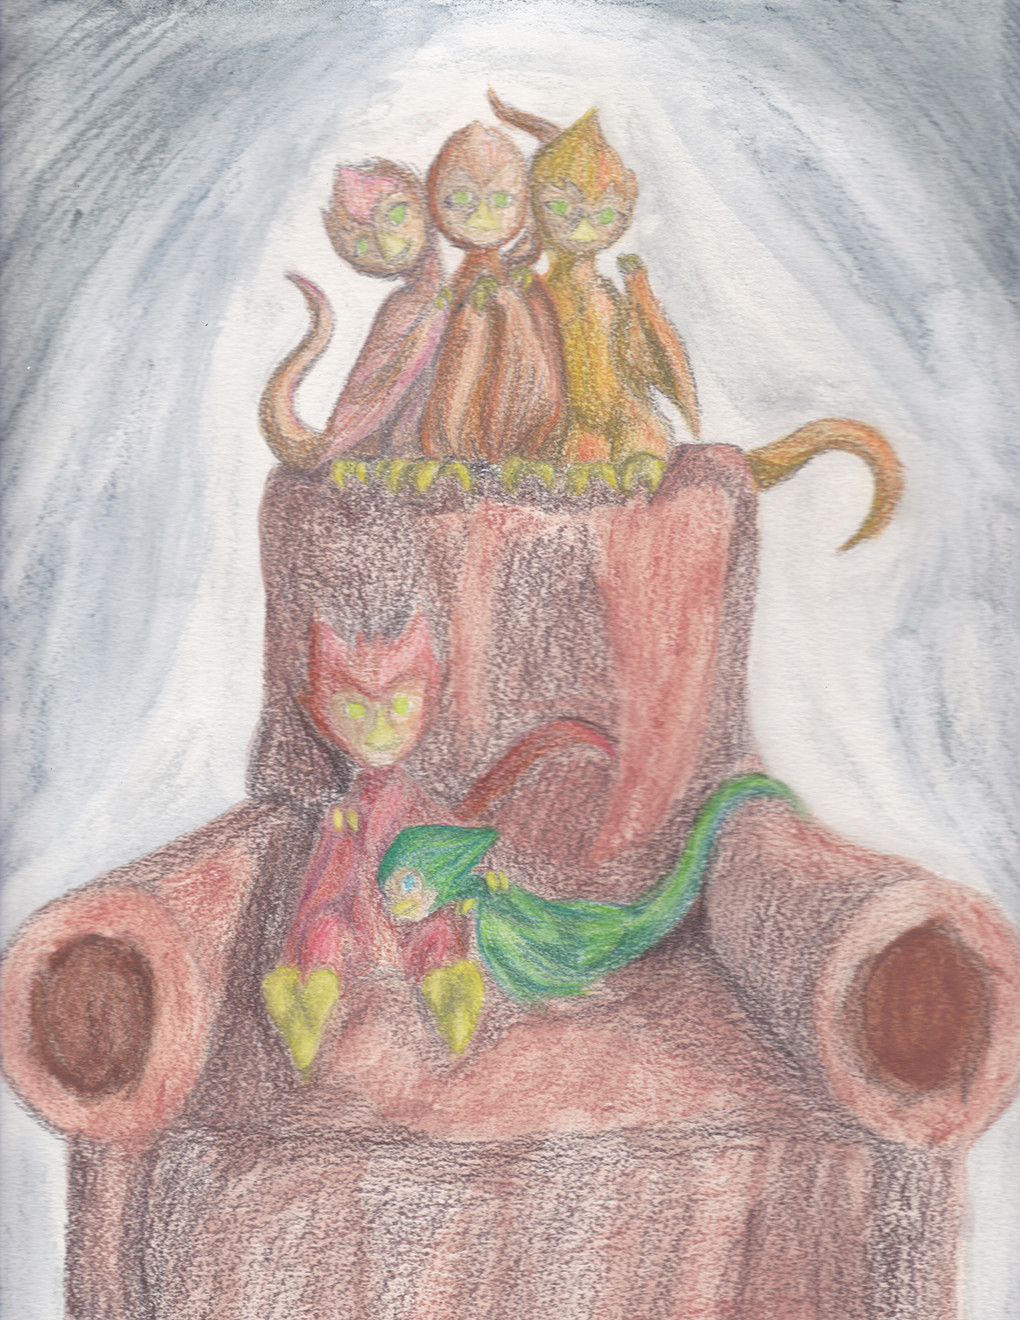 A concept art of young sirens as I have re-designed them.
This was done with Watercolor Pencils.